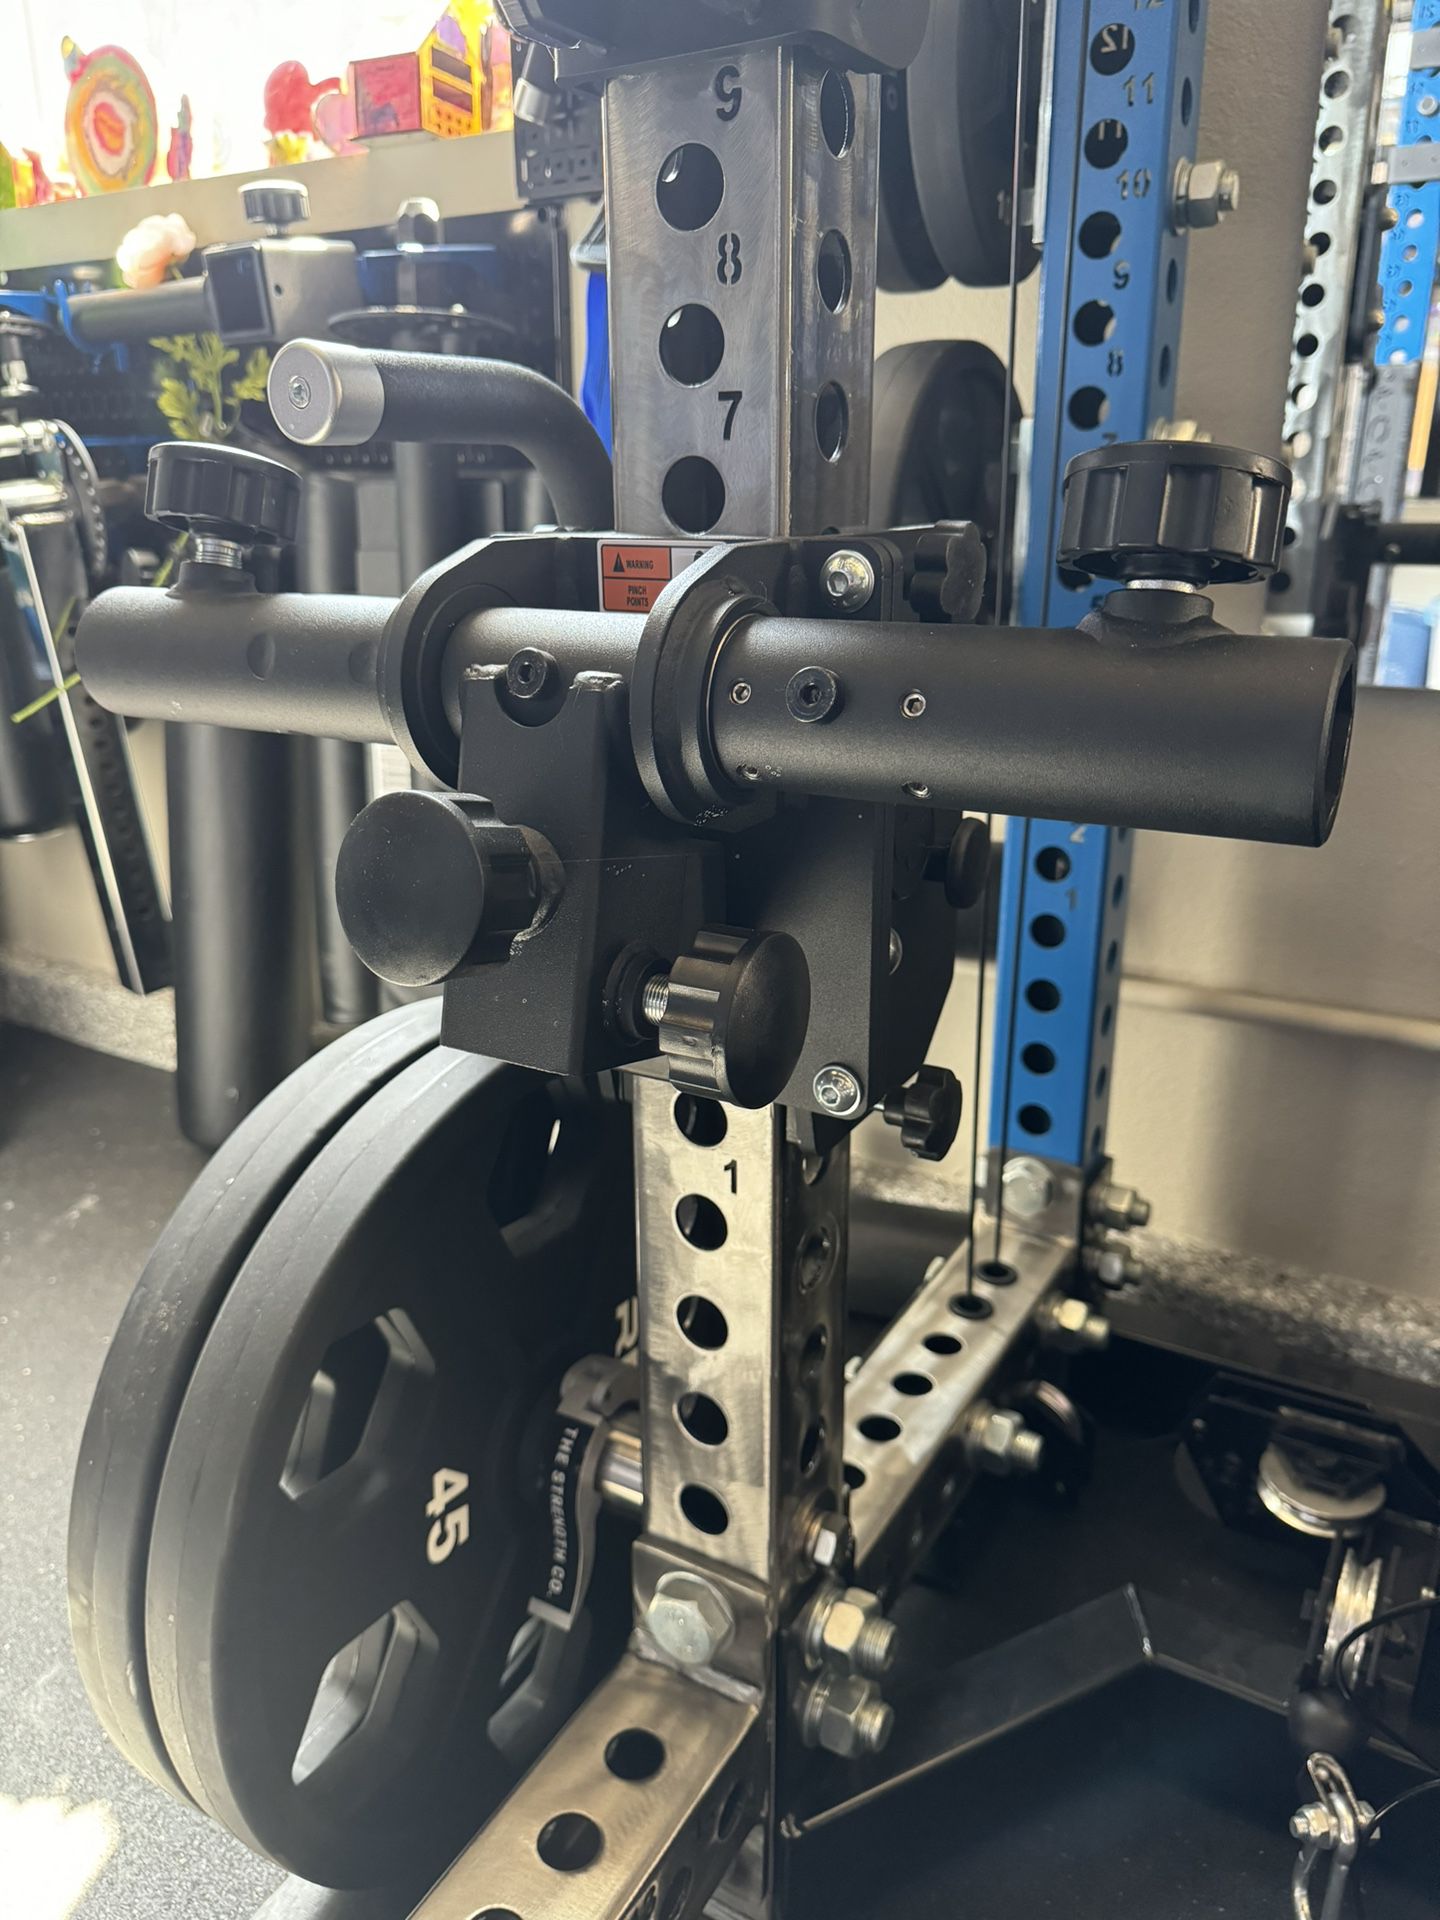 Bulletproof Fitness Isolator With Attachments For 3x3 Rack And 1” Holes